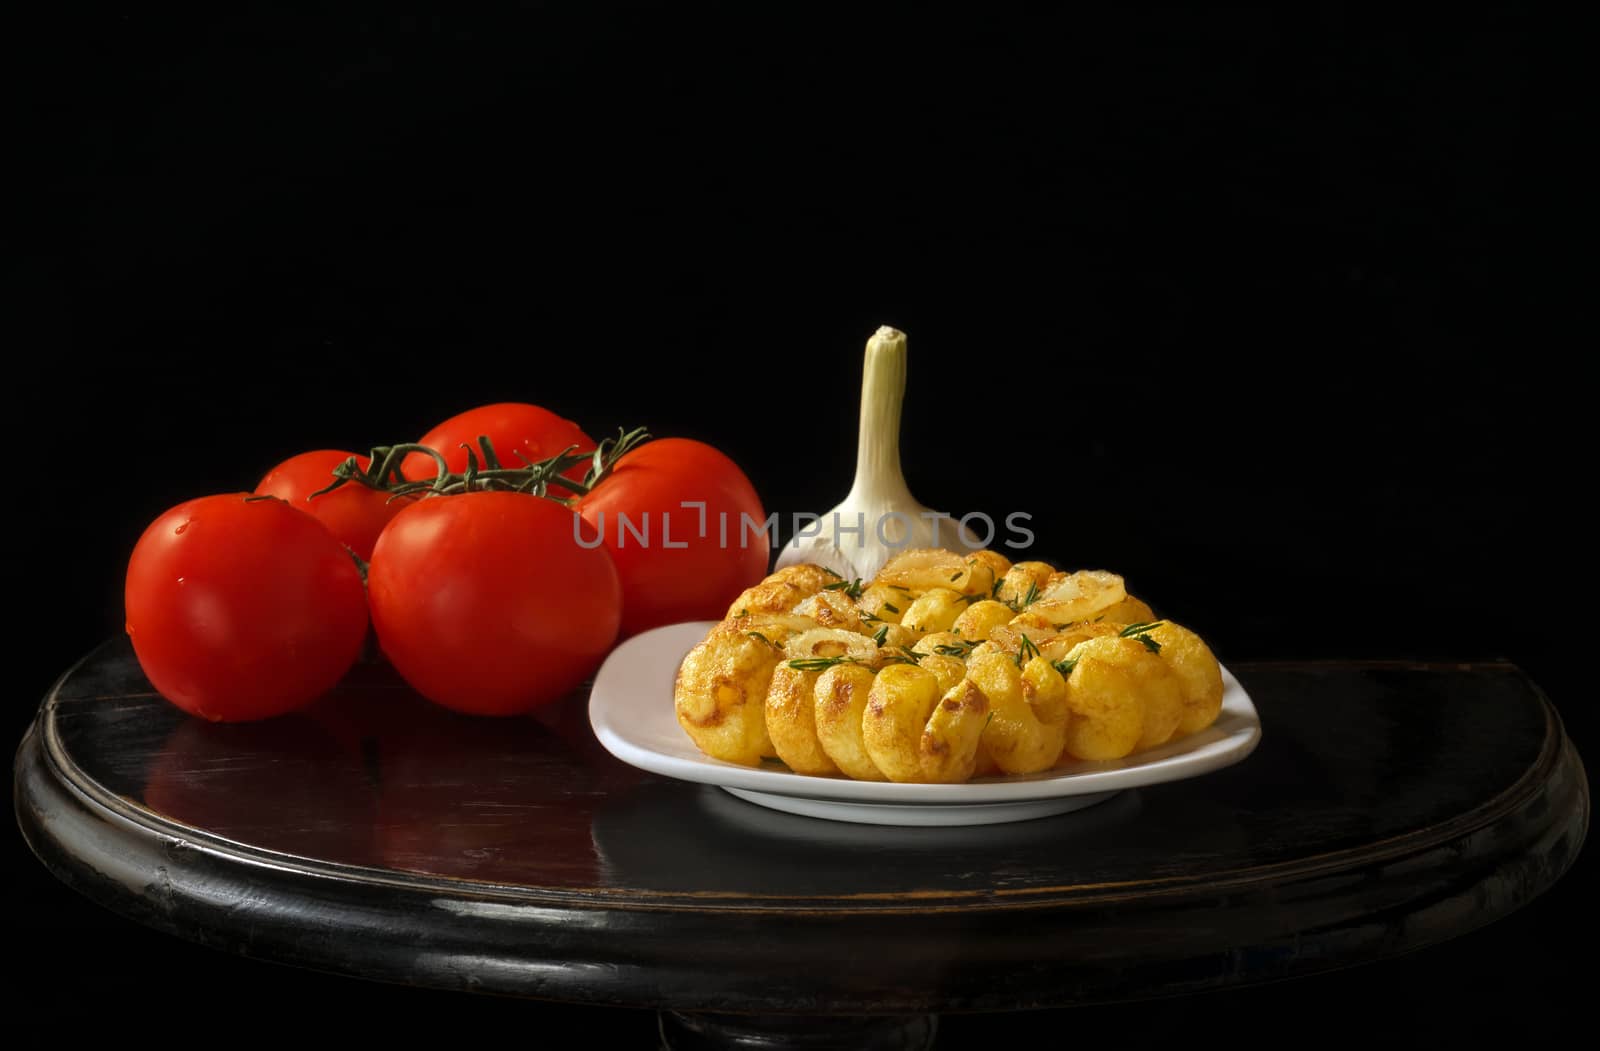 French fries and tomato, on a black background by Gaina